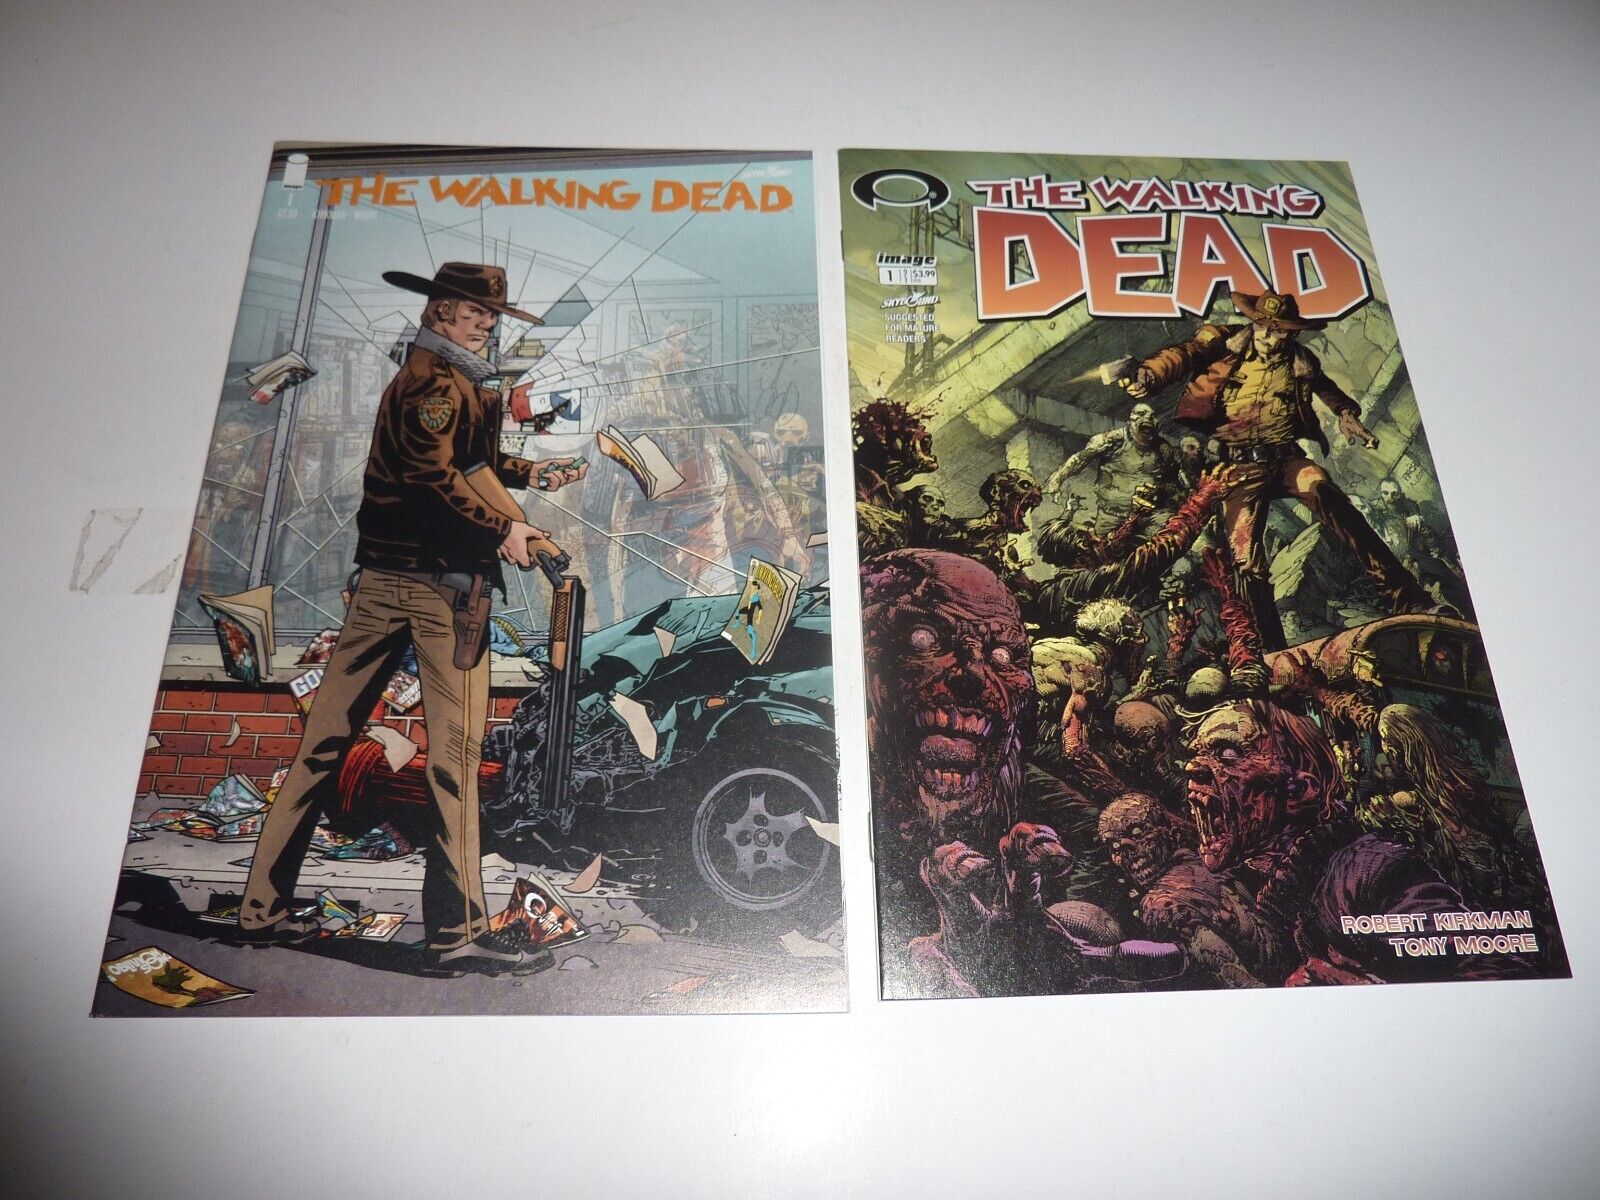 THE WALKING DEAD #1 Image 2018 15th Anniversary Variant Lot of 2 NM Unread